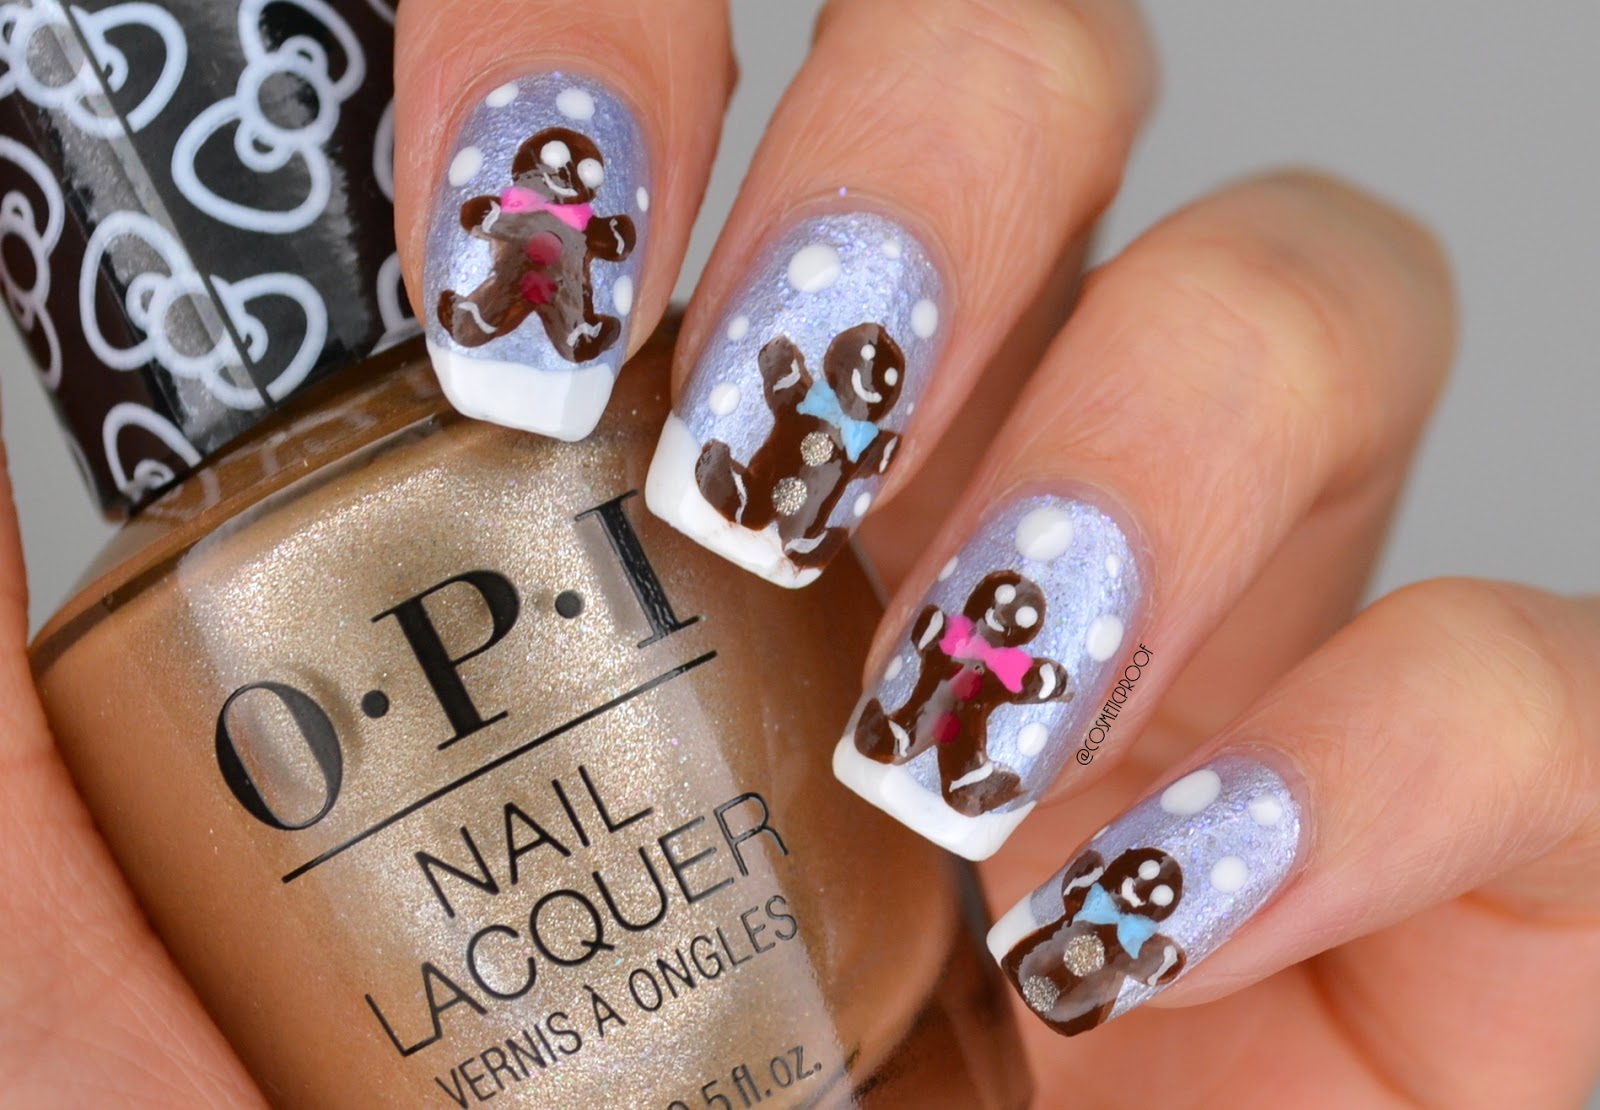 5. "Gingerbread Man Nails" - wide 7